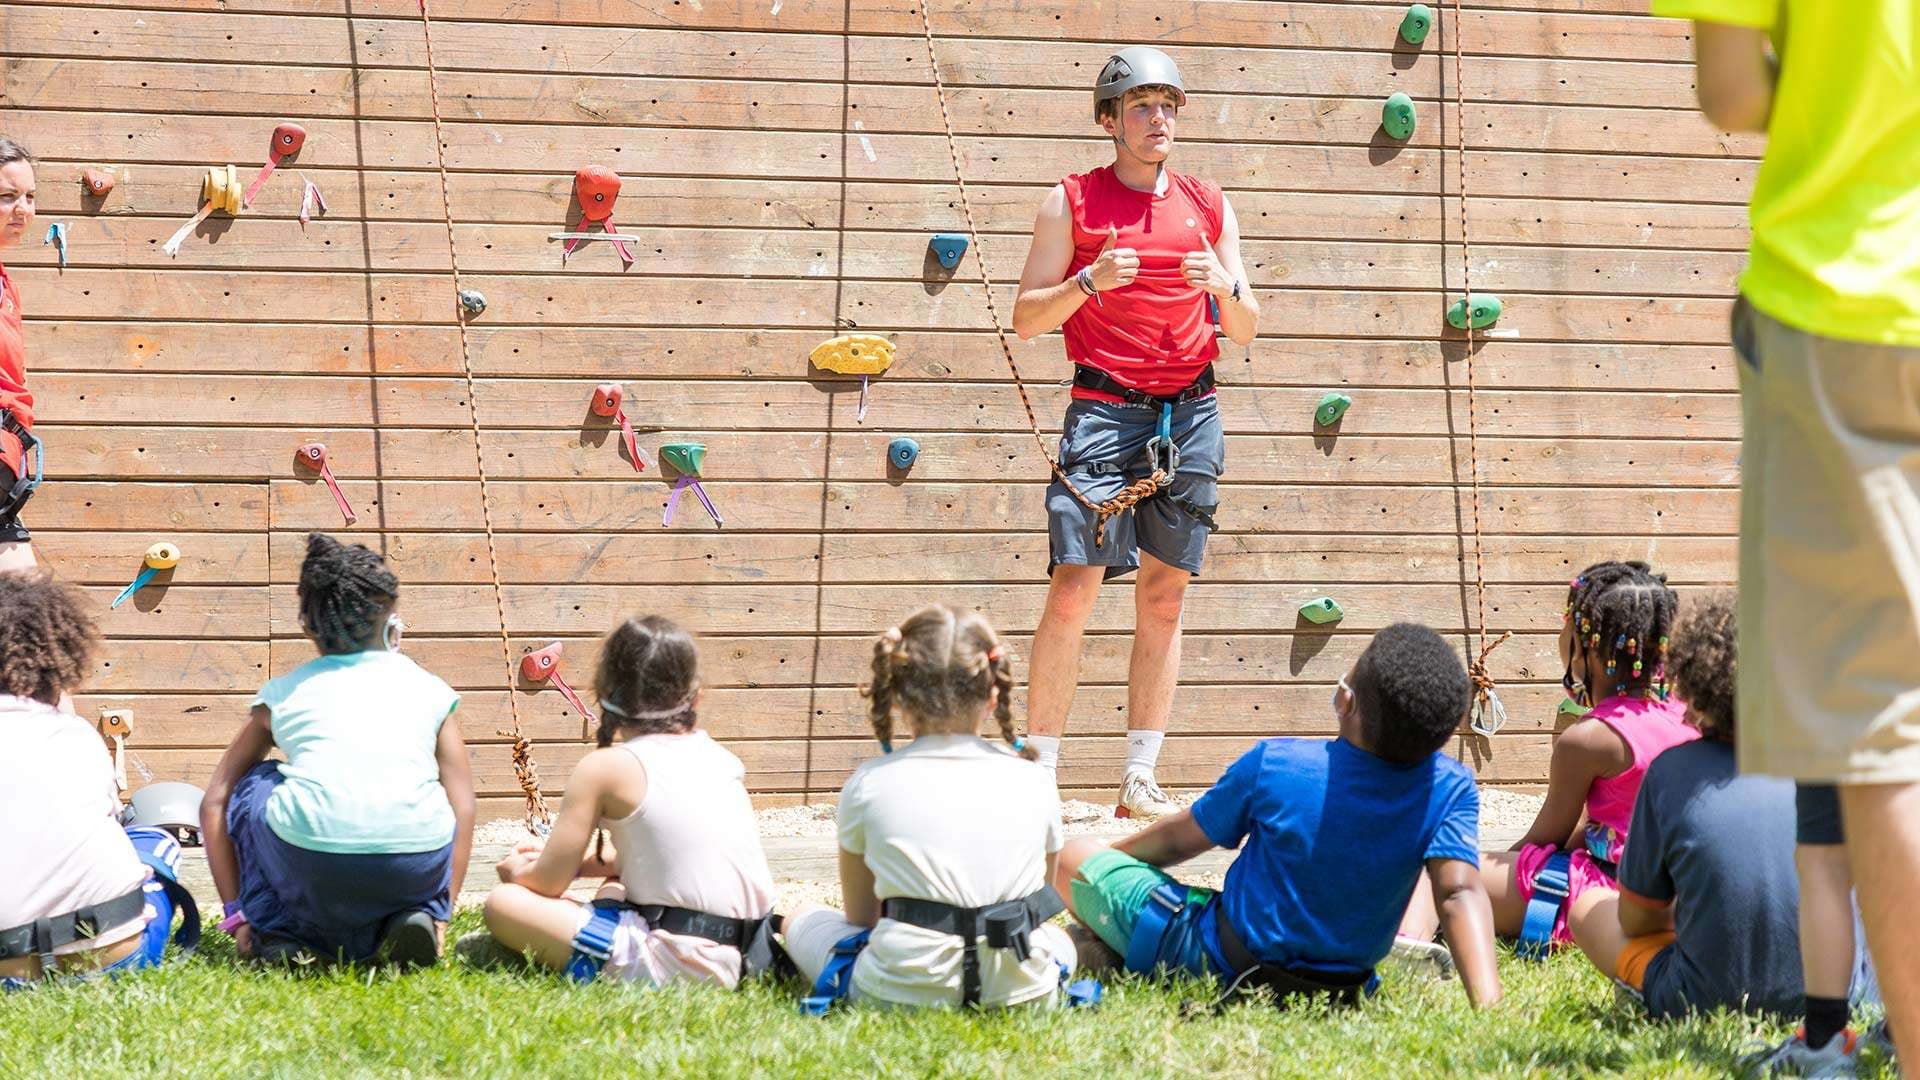 Camp counselor in helmet and gear in front of climbing wall speaking to seated kids